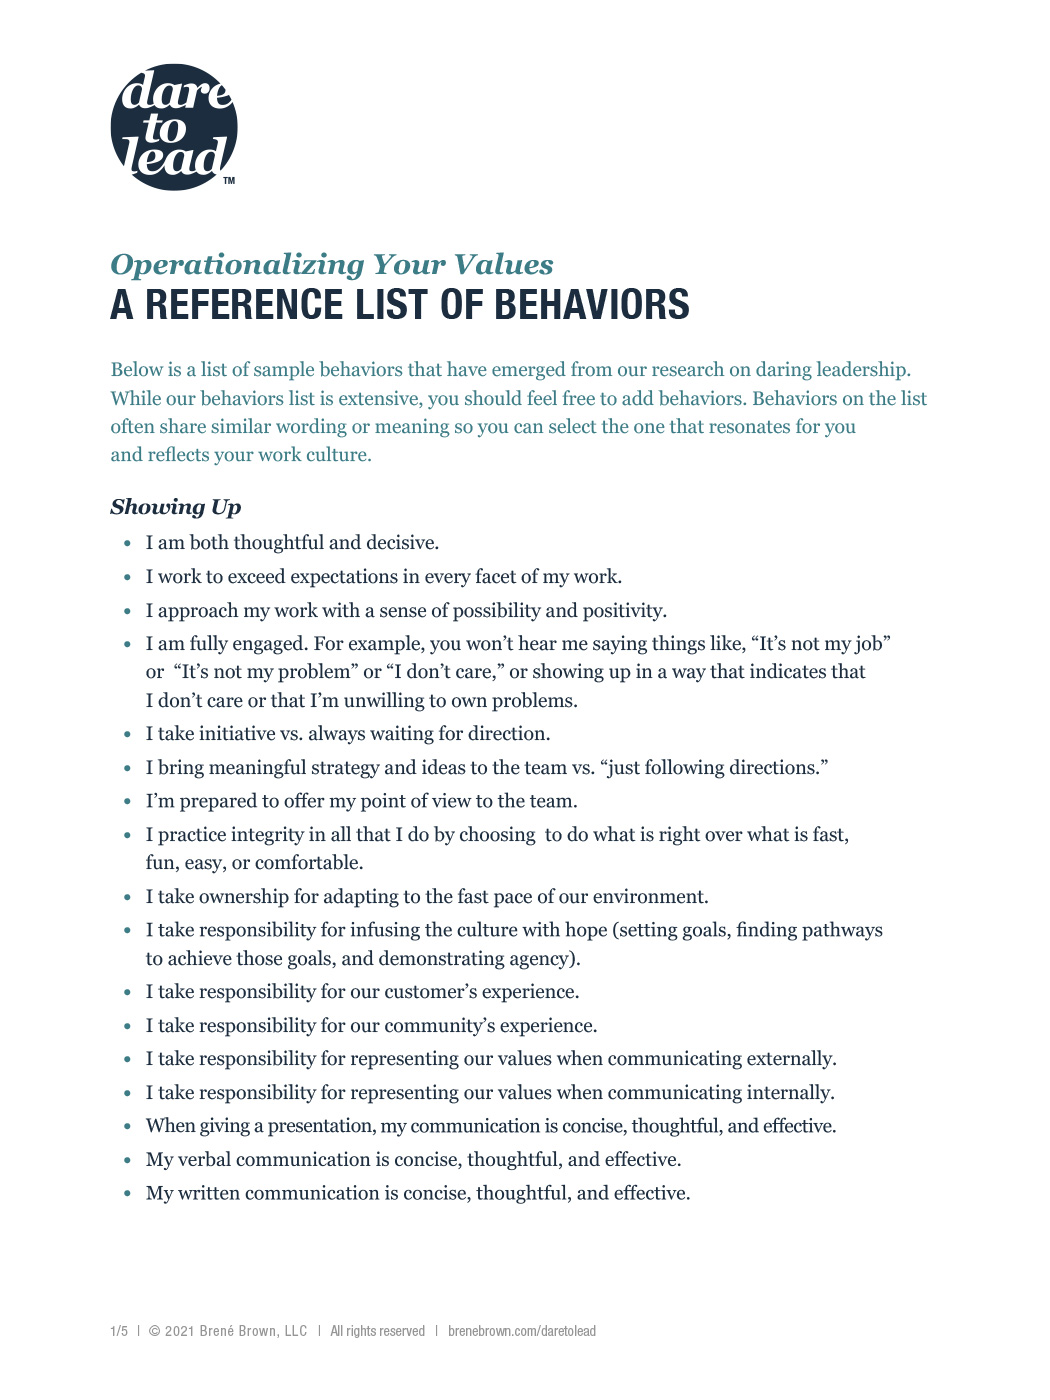 Dare to Lead Operationalizing Your Values: A Reference List of Behaviors